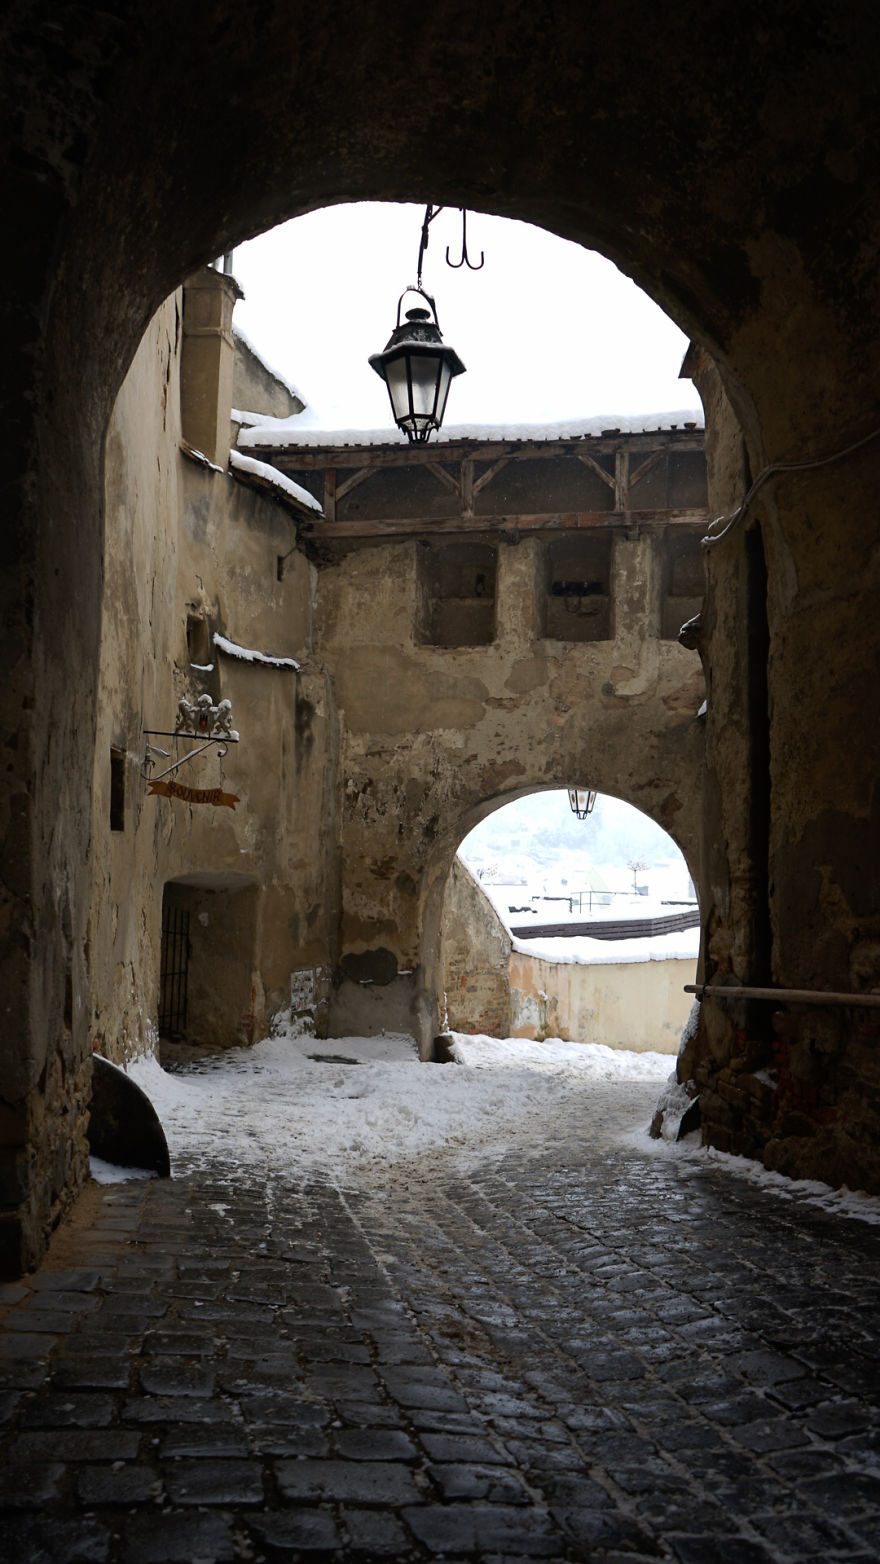 I Spent A Weekend In Sighisoara, Romania To Enjoy The Mesmerizing Atmosphere Of An Old Town During Winter